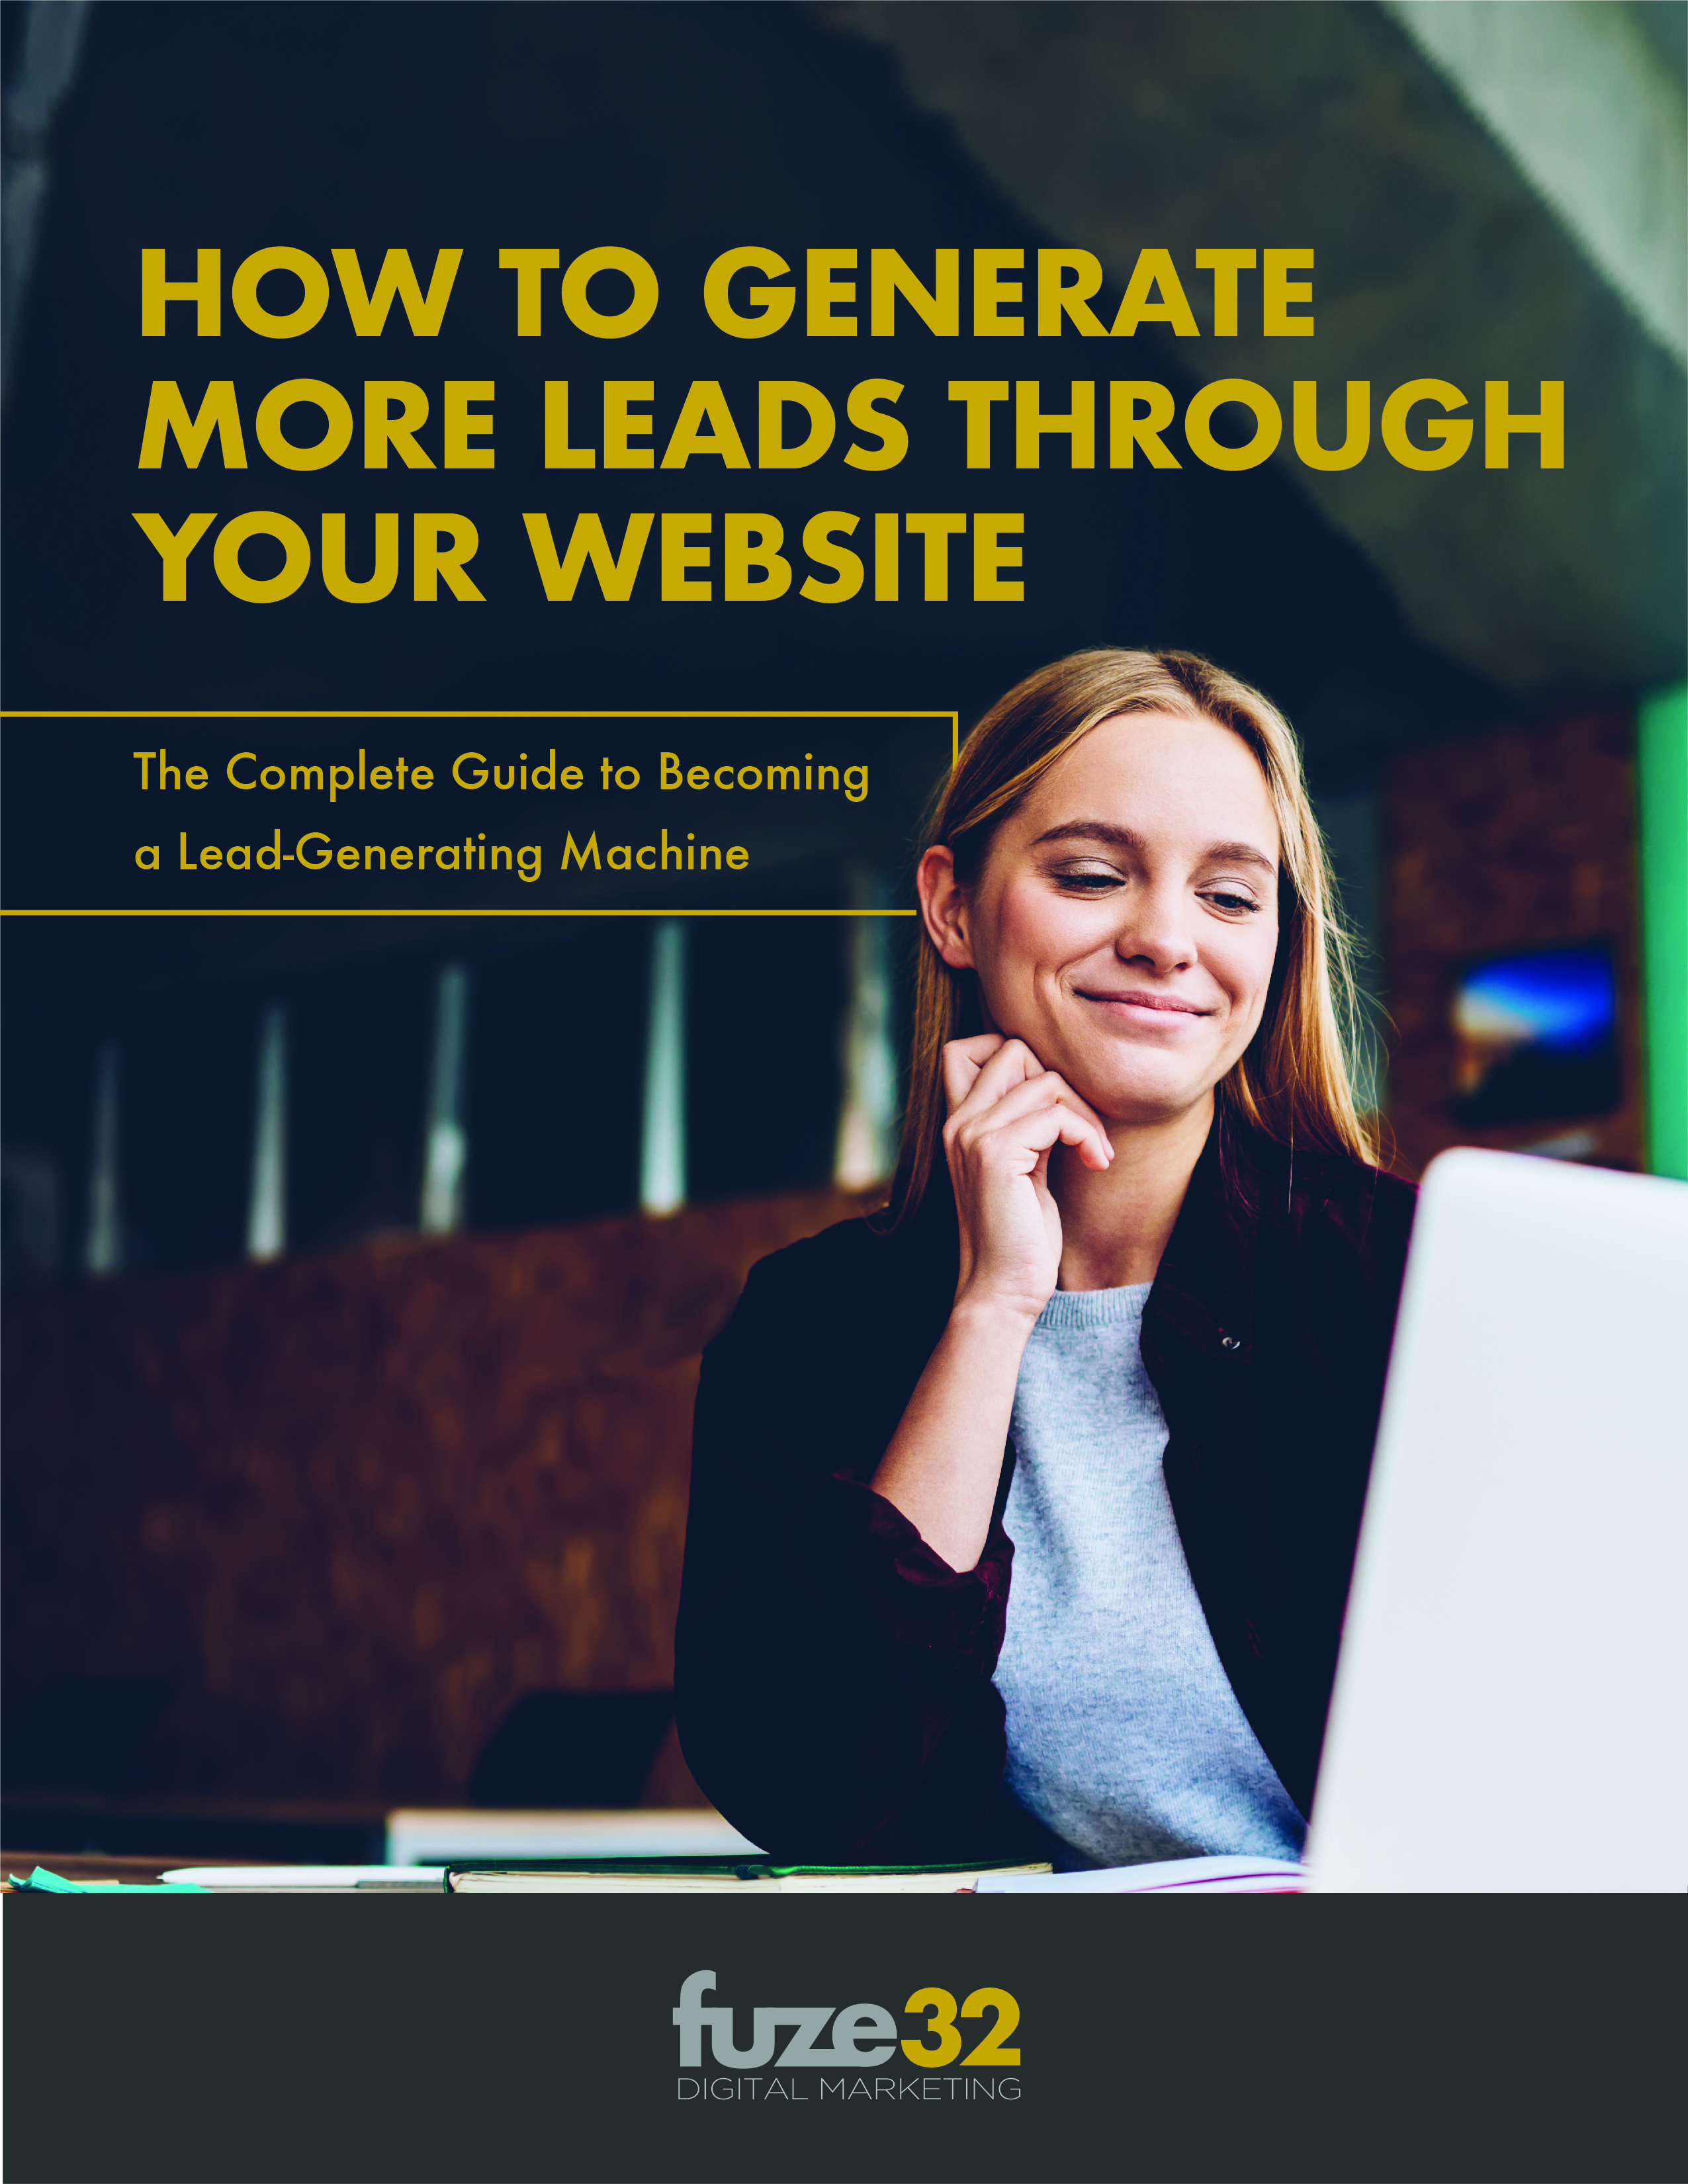 fuze32-eBook-How-To-Generate-Leads-Through-Website-Featured-Image (4)